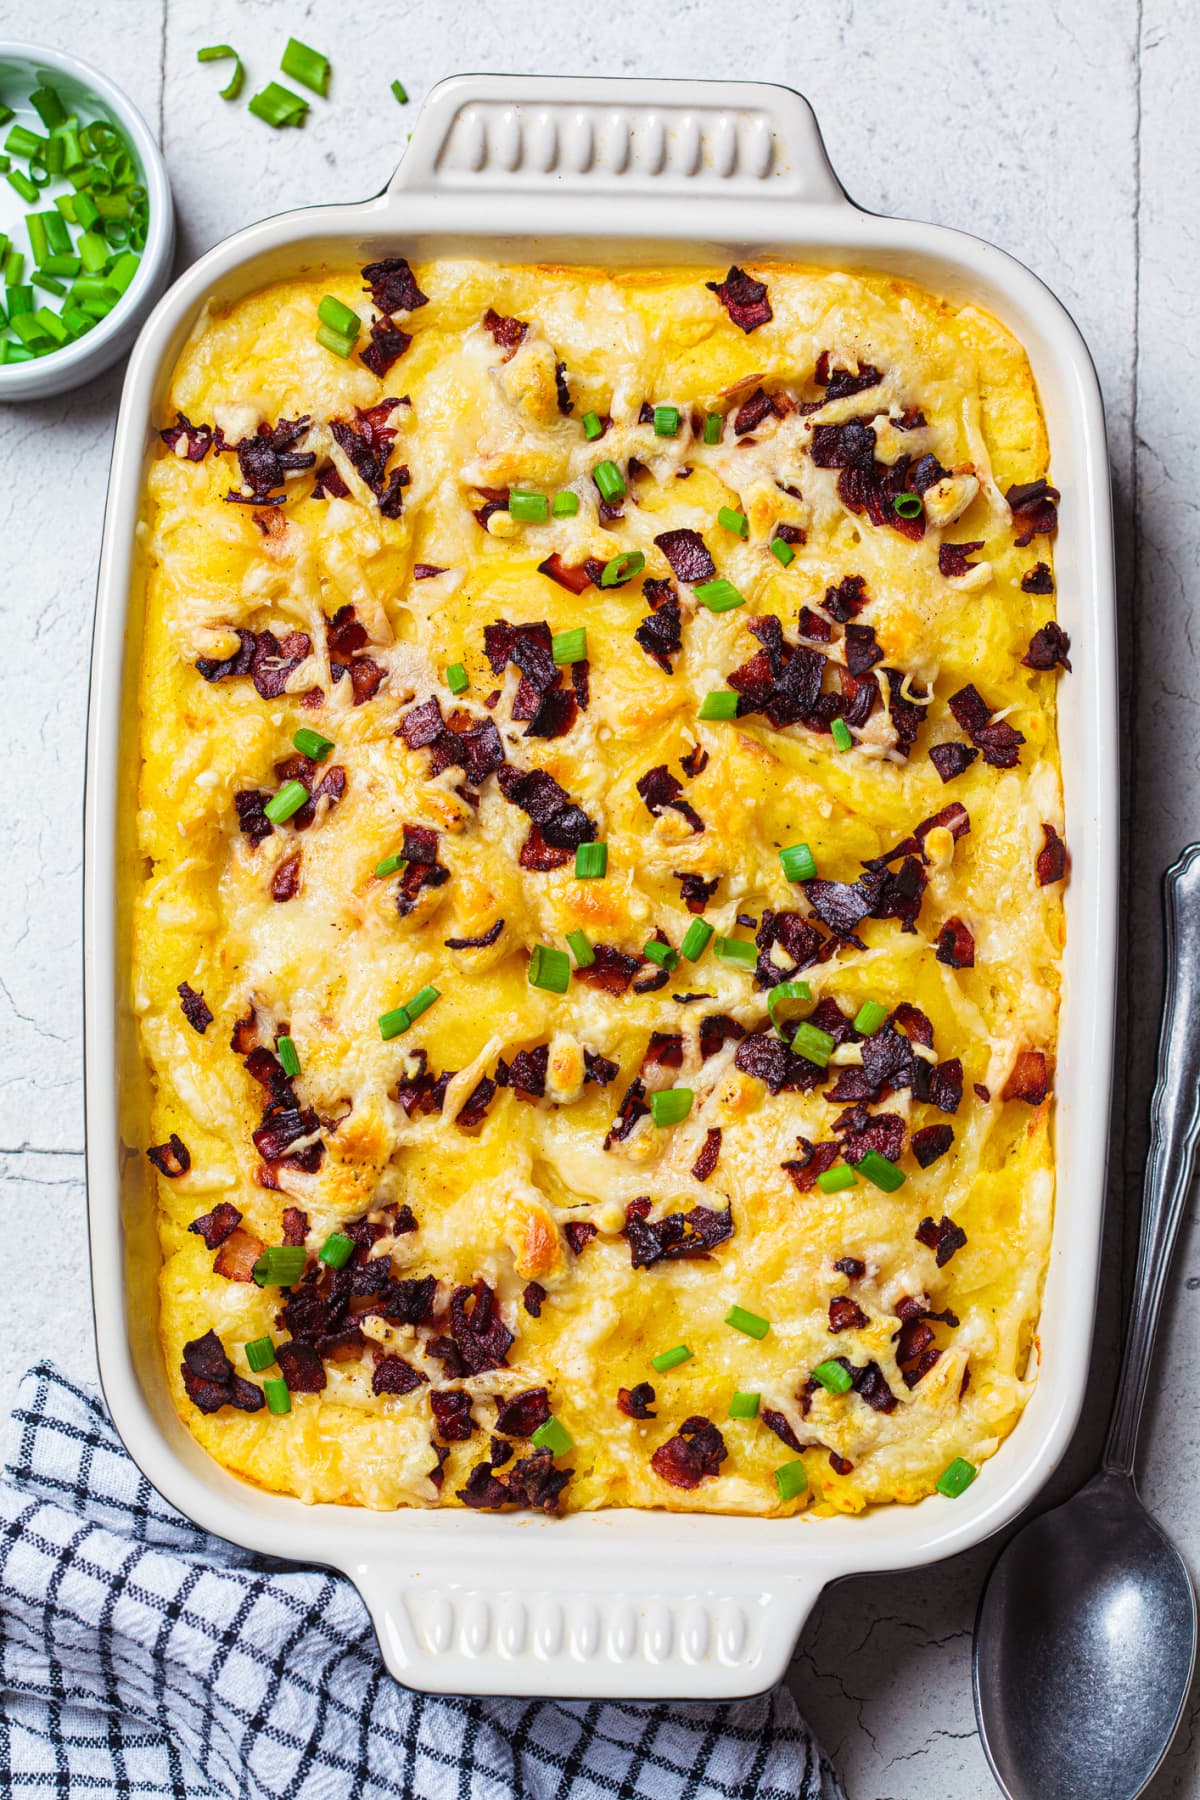 A casserole dish of mashed potatoes with cheese, bacon, and green onions